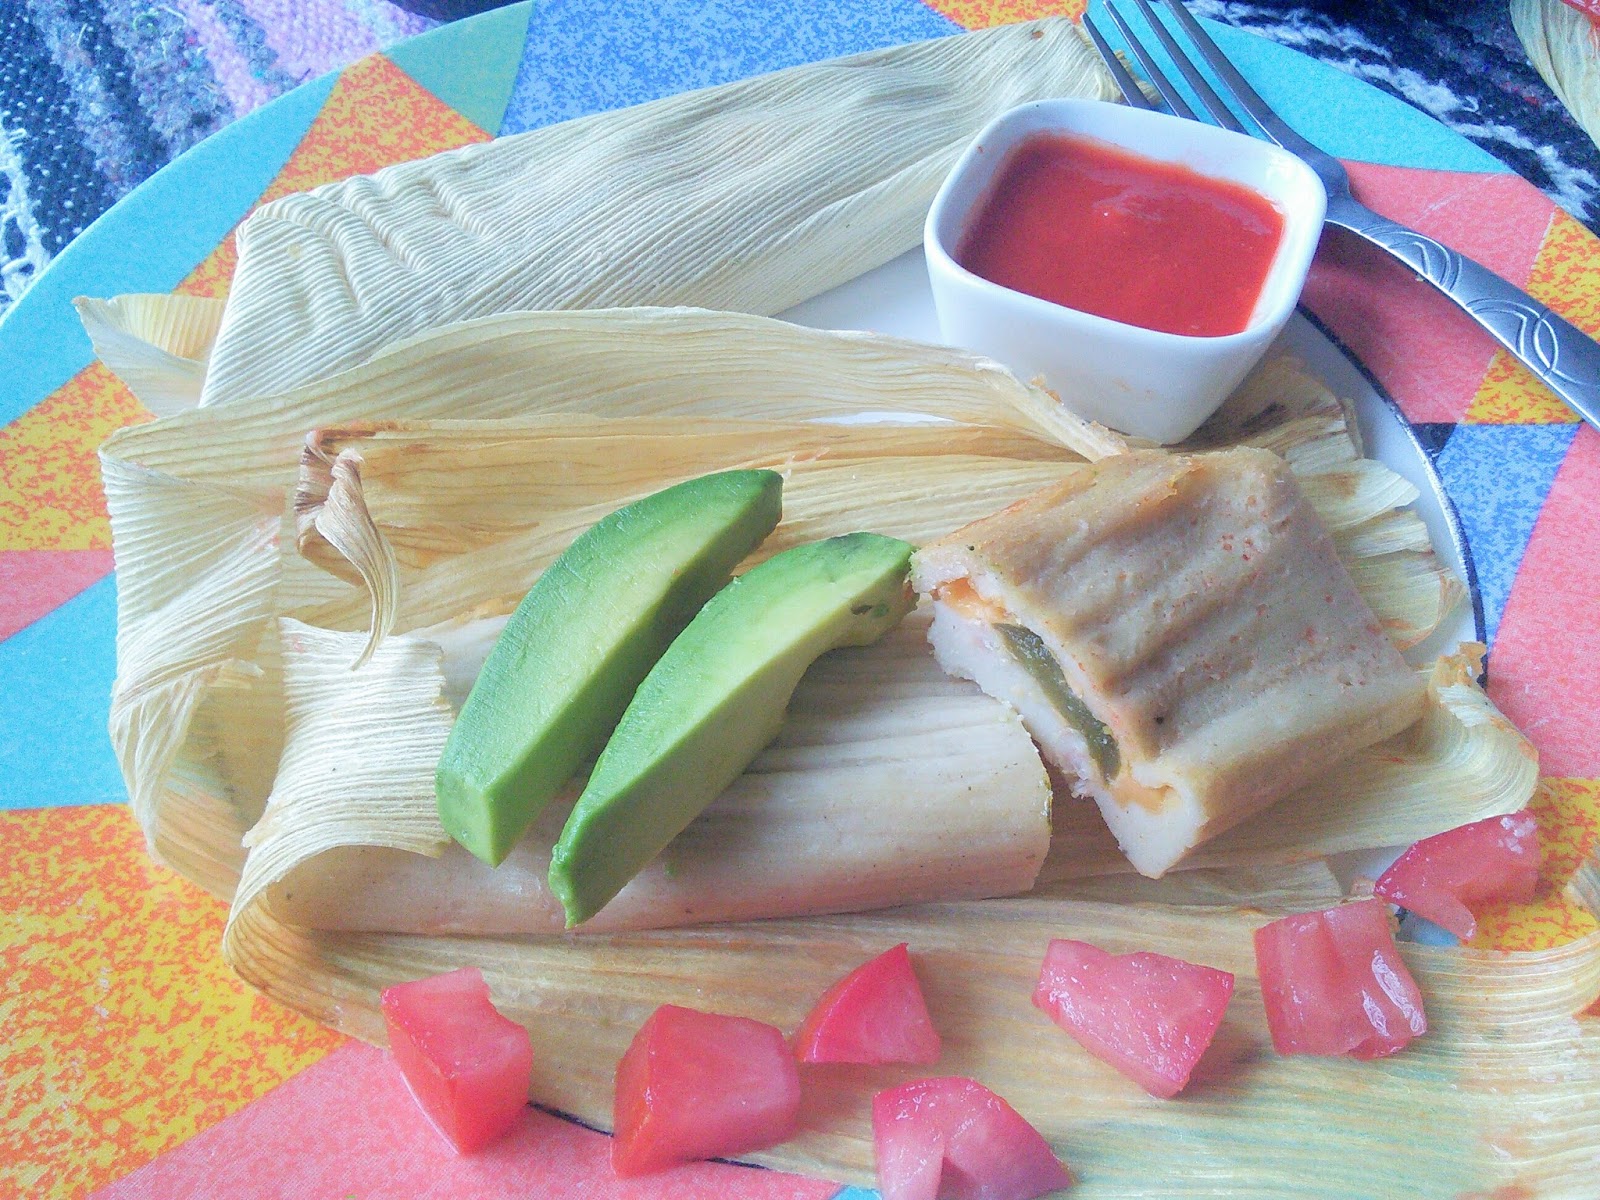 I love cooking tamales in the slow cooker as it is so easy